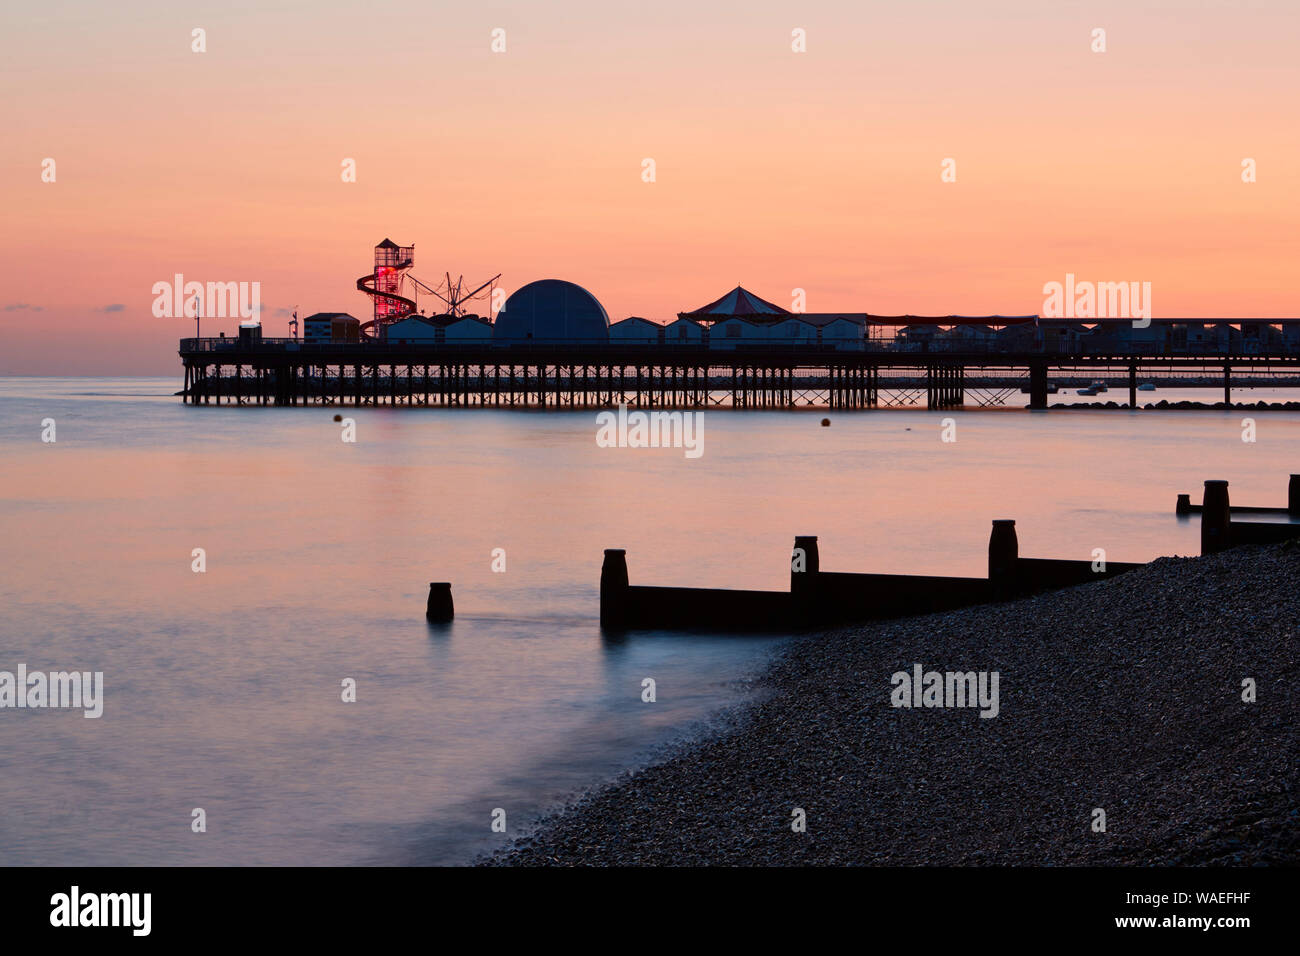 Herne Bay, Kent, UK. 20th August 2019: UK weather. Clear skies over the pier at Herne bay  just before dawn. The forecast is for hot sunny weather for the next few days and the bank holiday weekend which could cause some thunderstorms. Credit: Alan Payton/Alamy Live News Stock Photo